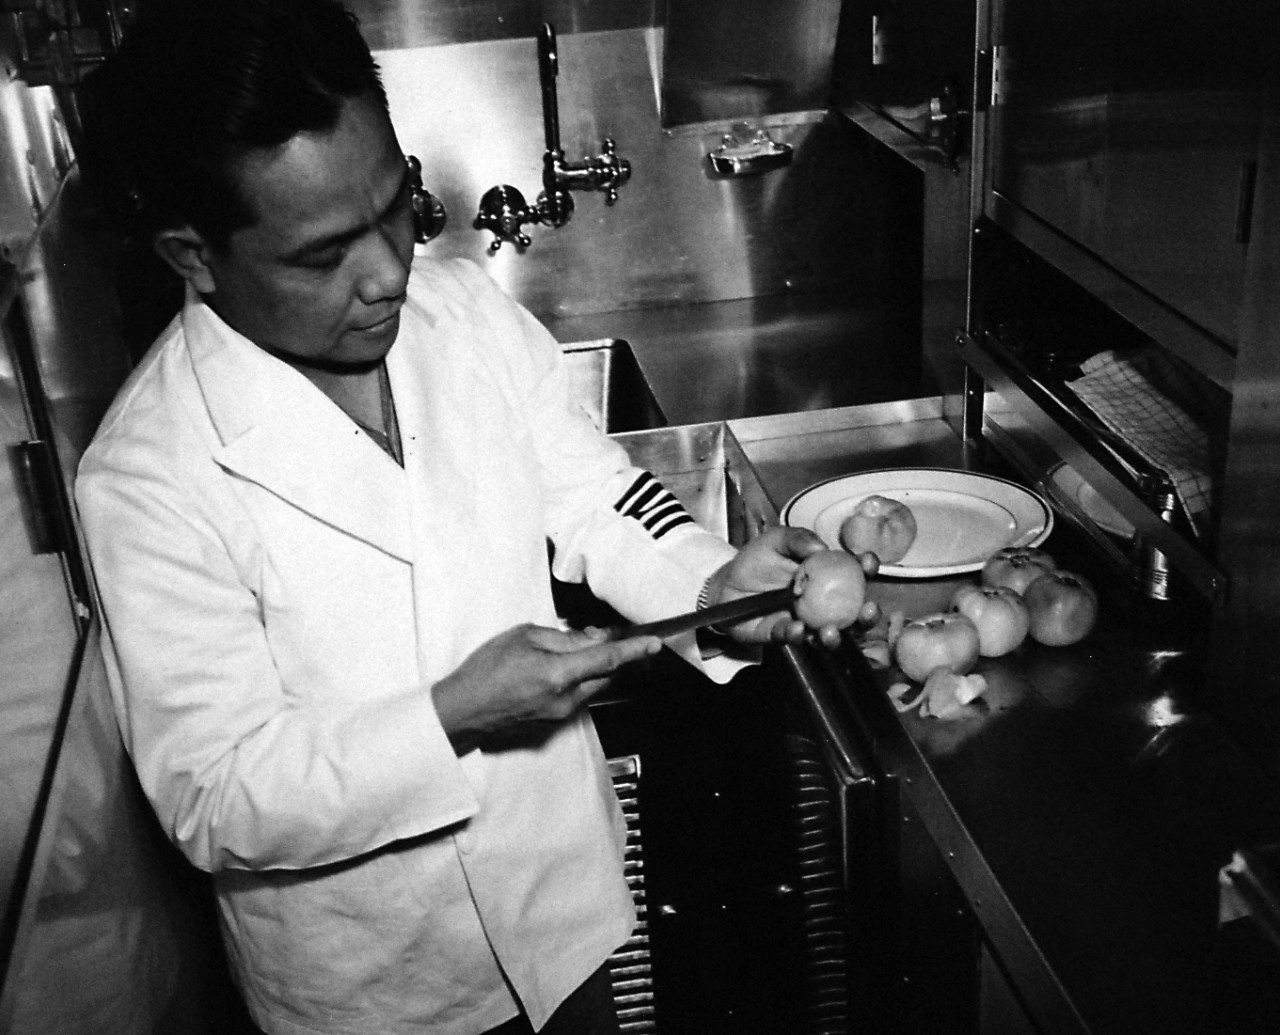 80-G-41801:   Life aboard a U.S. submarine, 1943.    In the wardroom kitchen, an officer’s steward fixes tomatoes for a salad.     Photographed June 8, 1943.  Official U.S. Navy Photograph, now in the collections of the National Archives.  